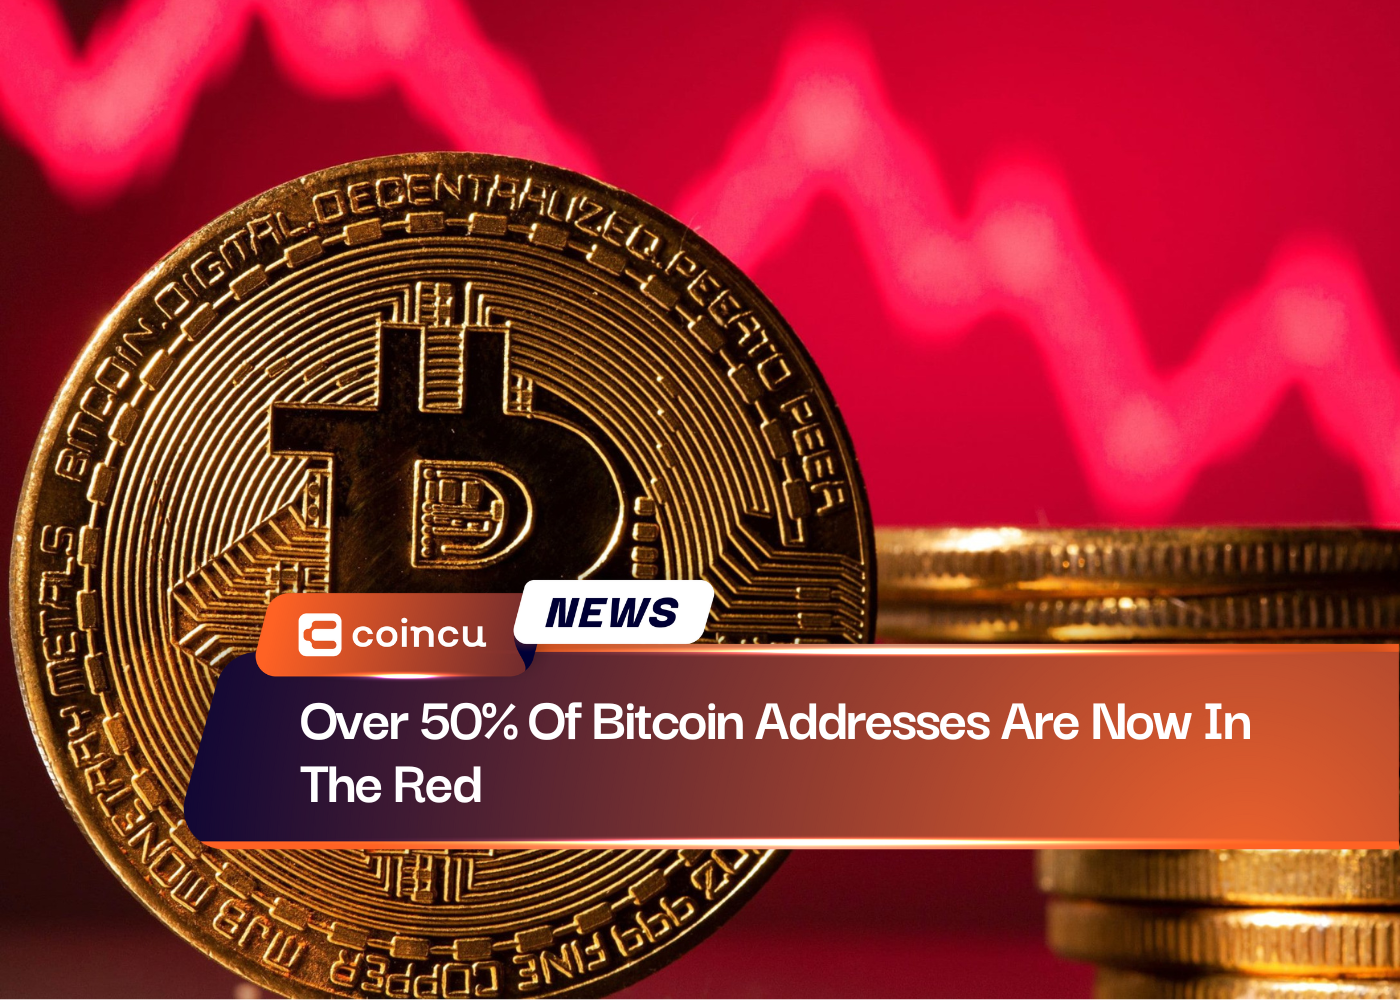 Over 50% Of Bitcoin Addresses Are Now In The Red